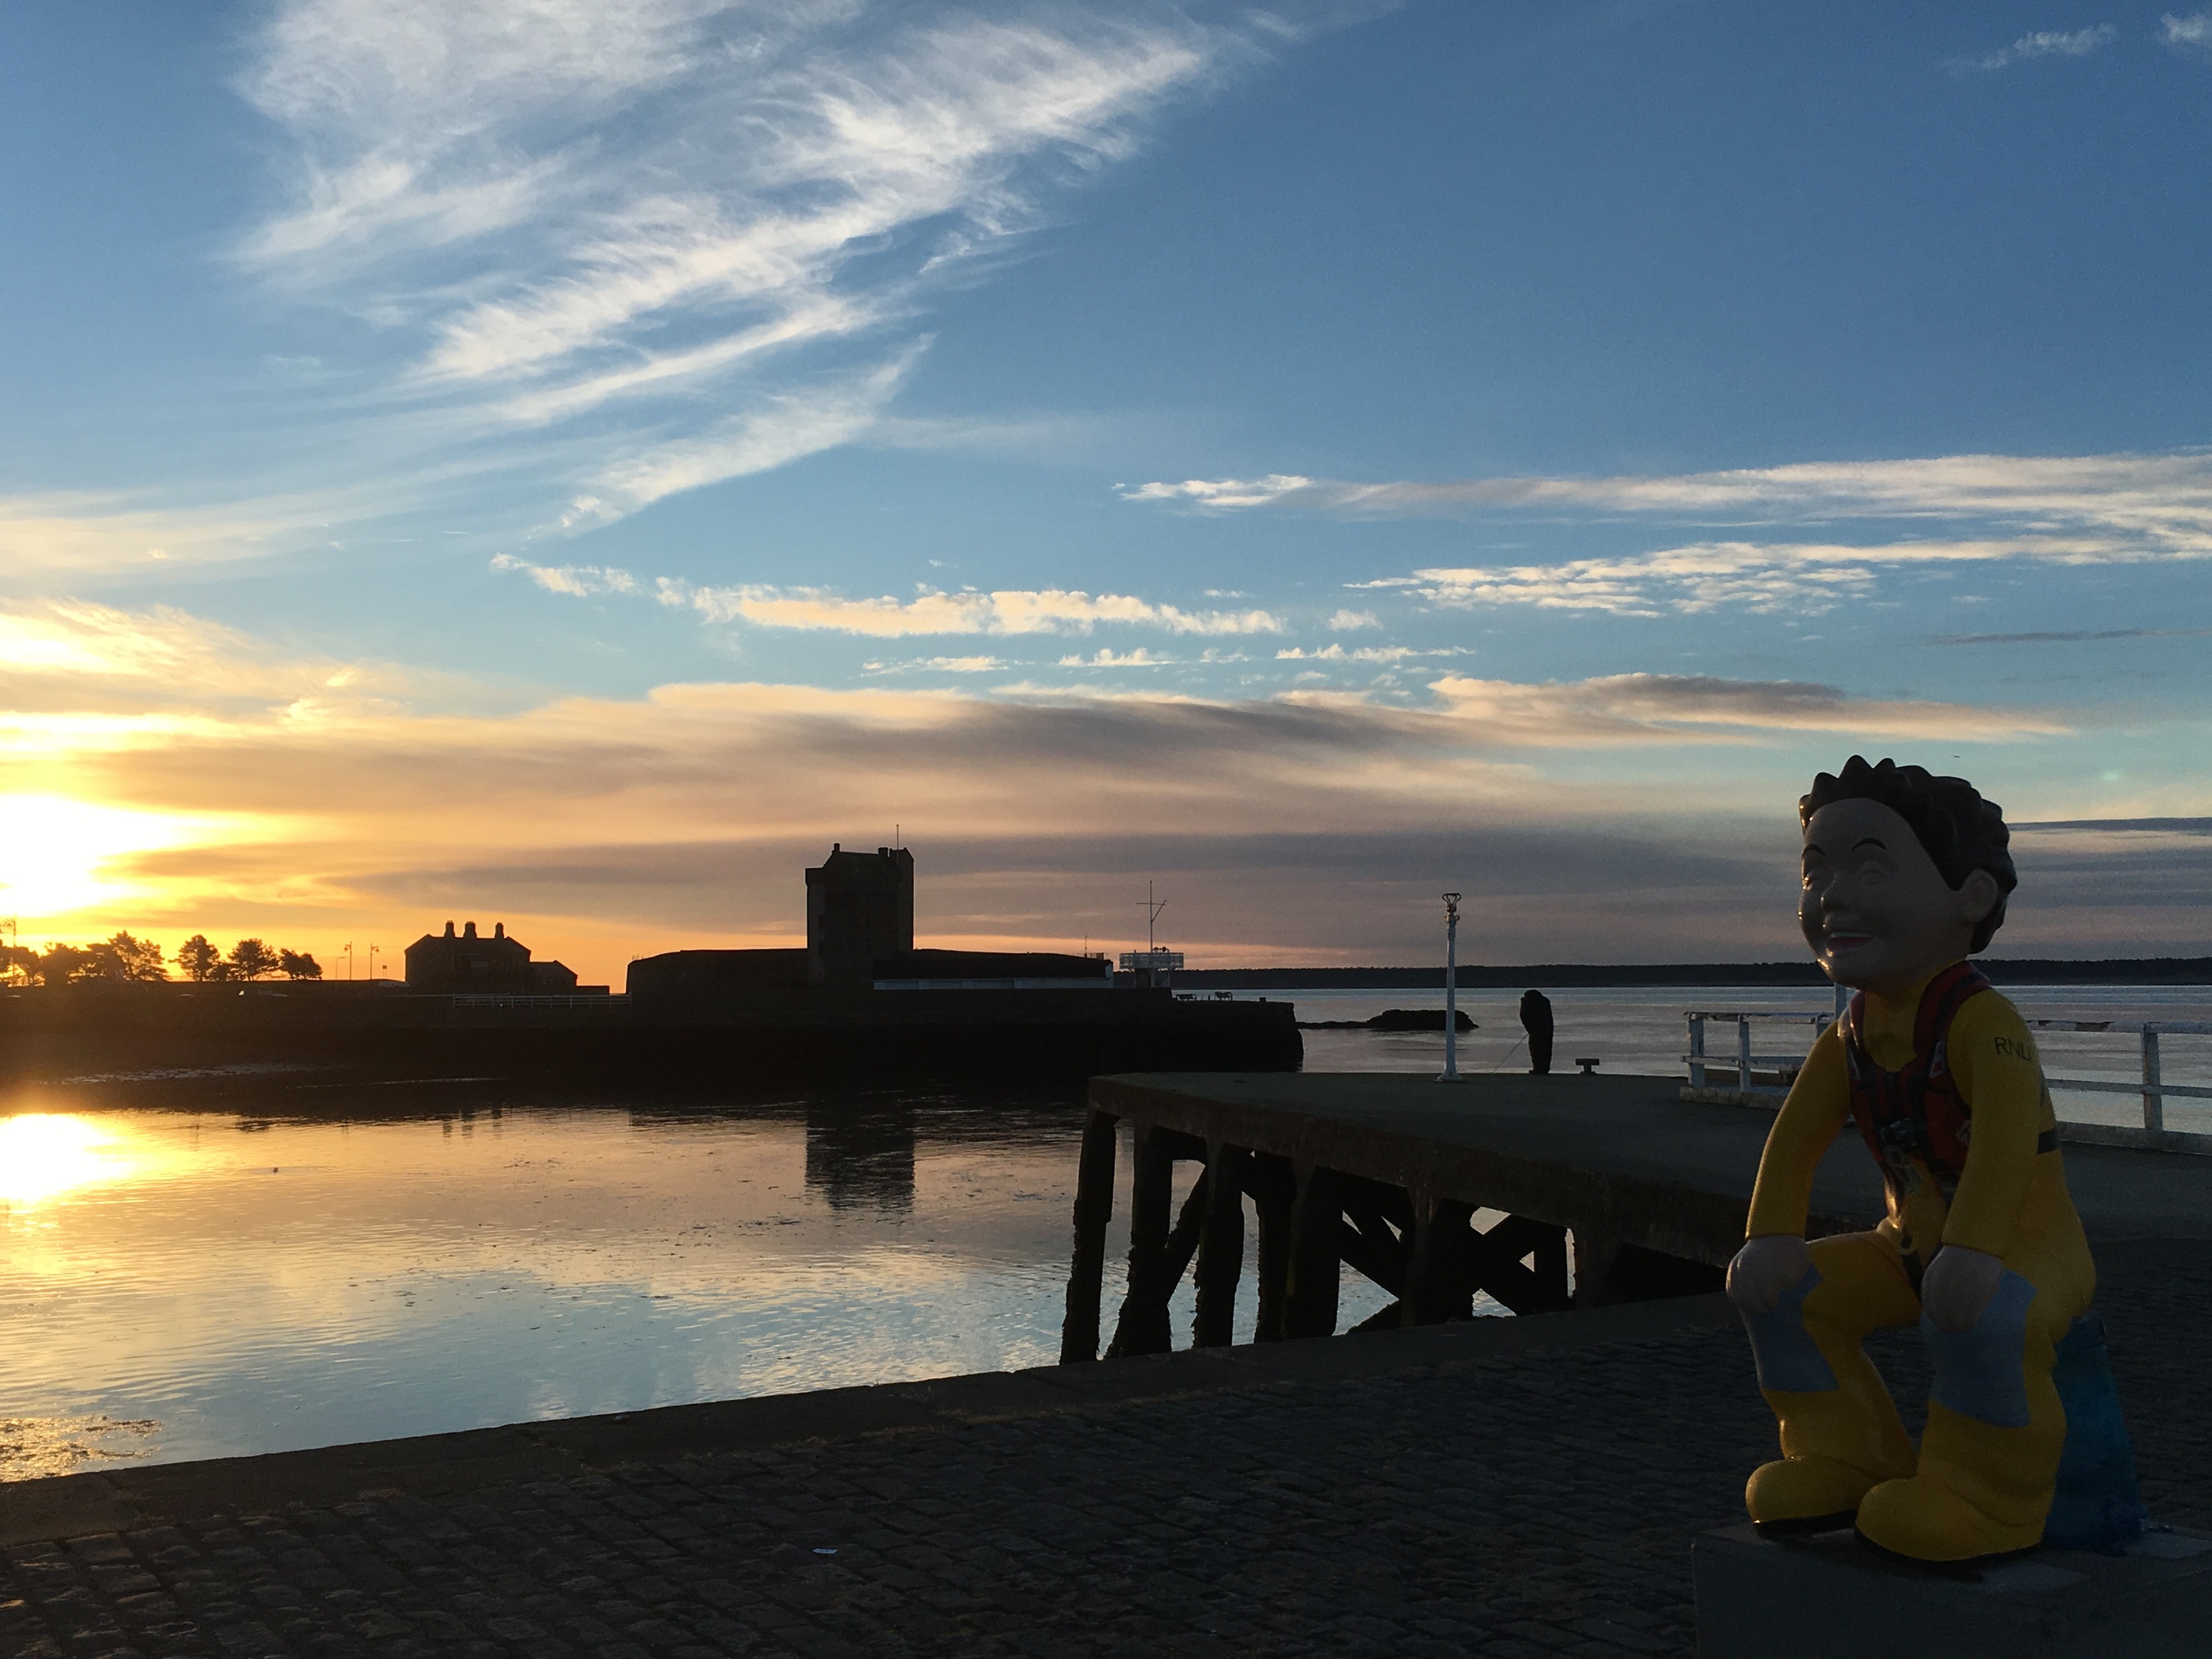 Wullie's enjoys a glorious first sunrise in his new home